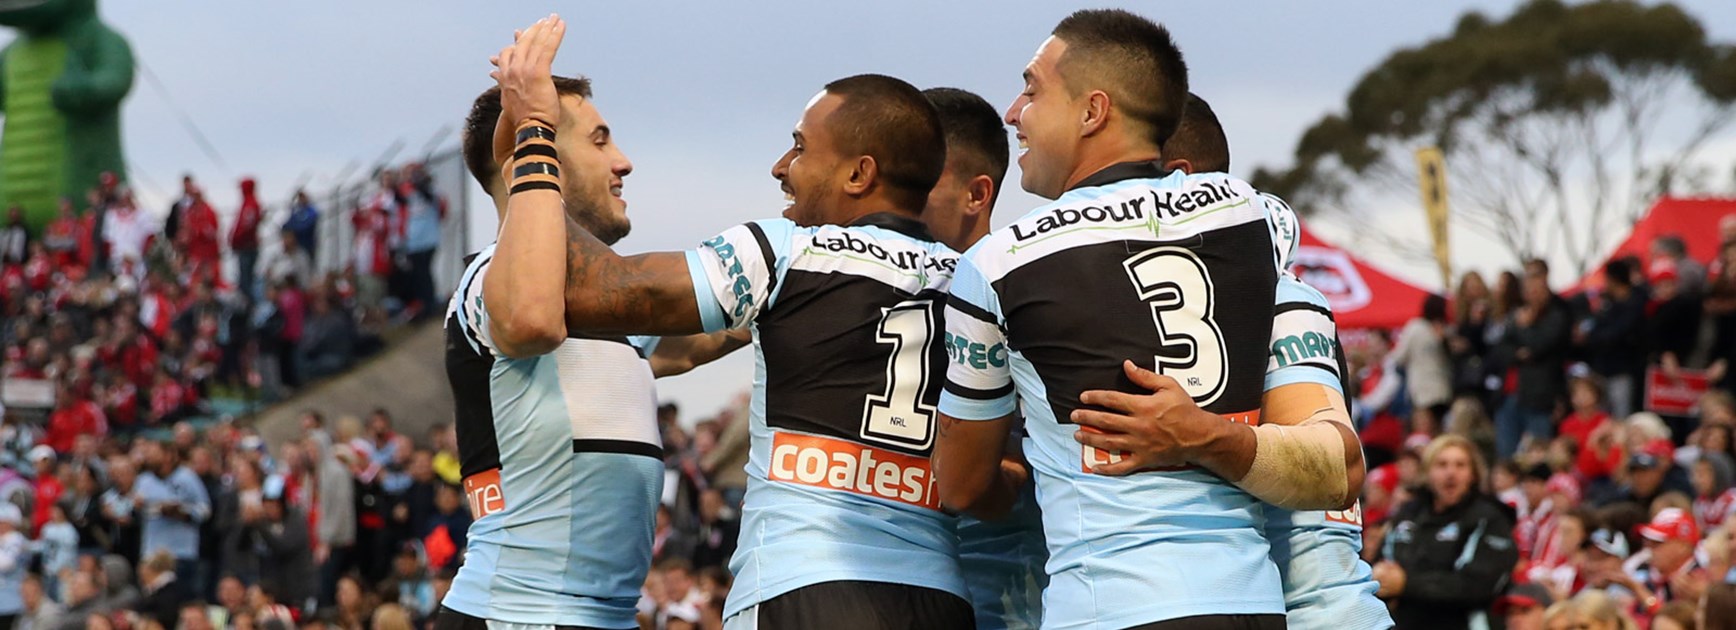 The statistics suggest the Sharks could be one of the big movers in 2016.